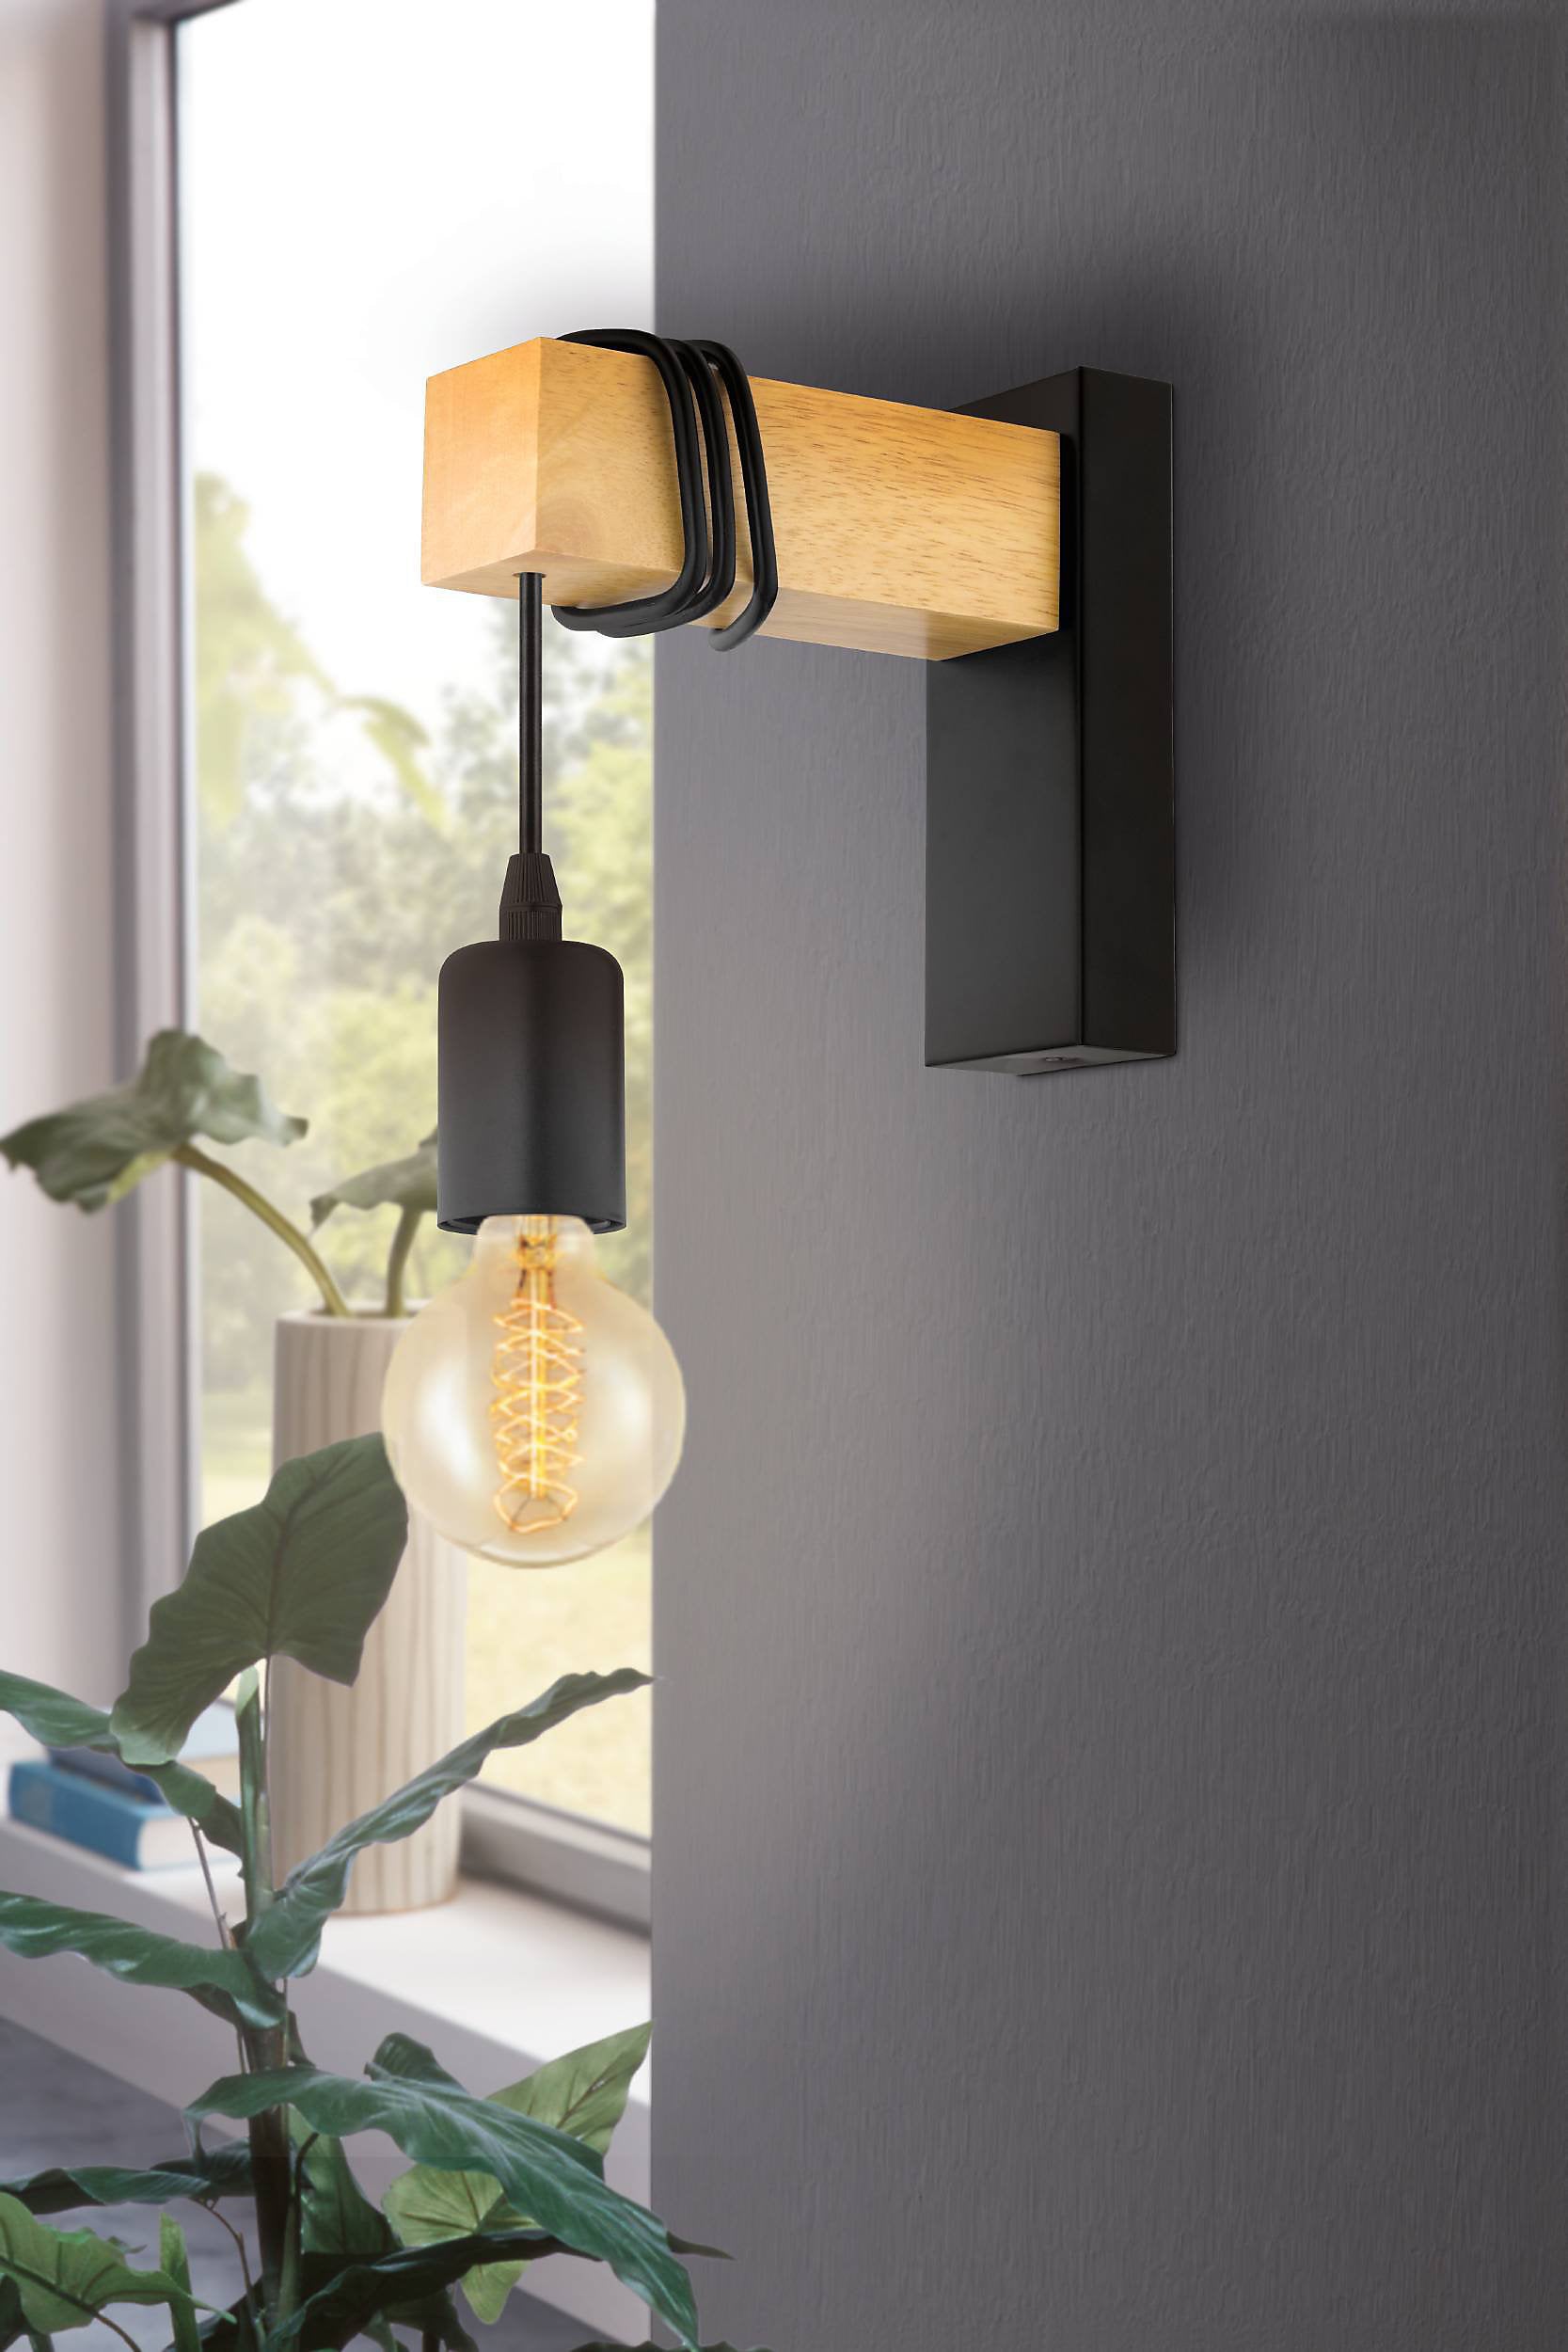 EGLO Townshend Black Metal & Natural Wood Wall Light - Vintage Industrial Style (D) 21.5cm 9174